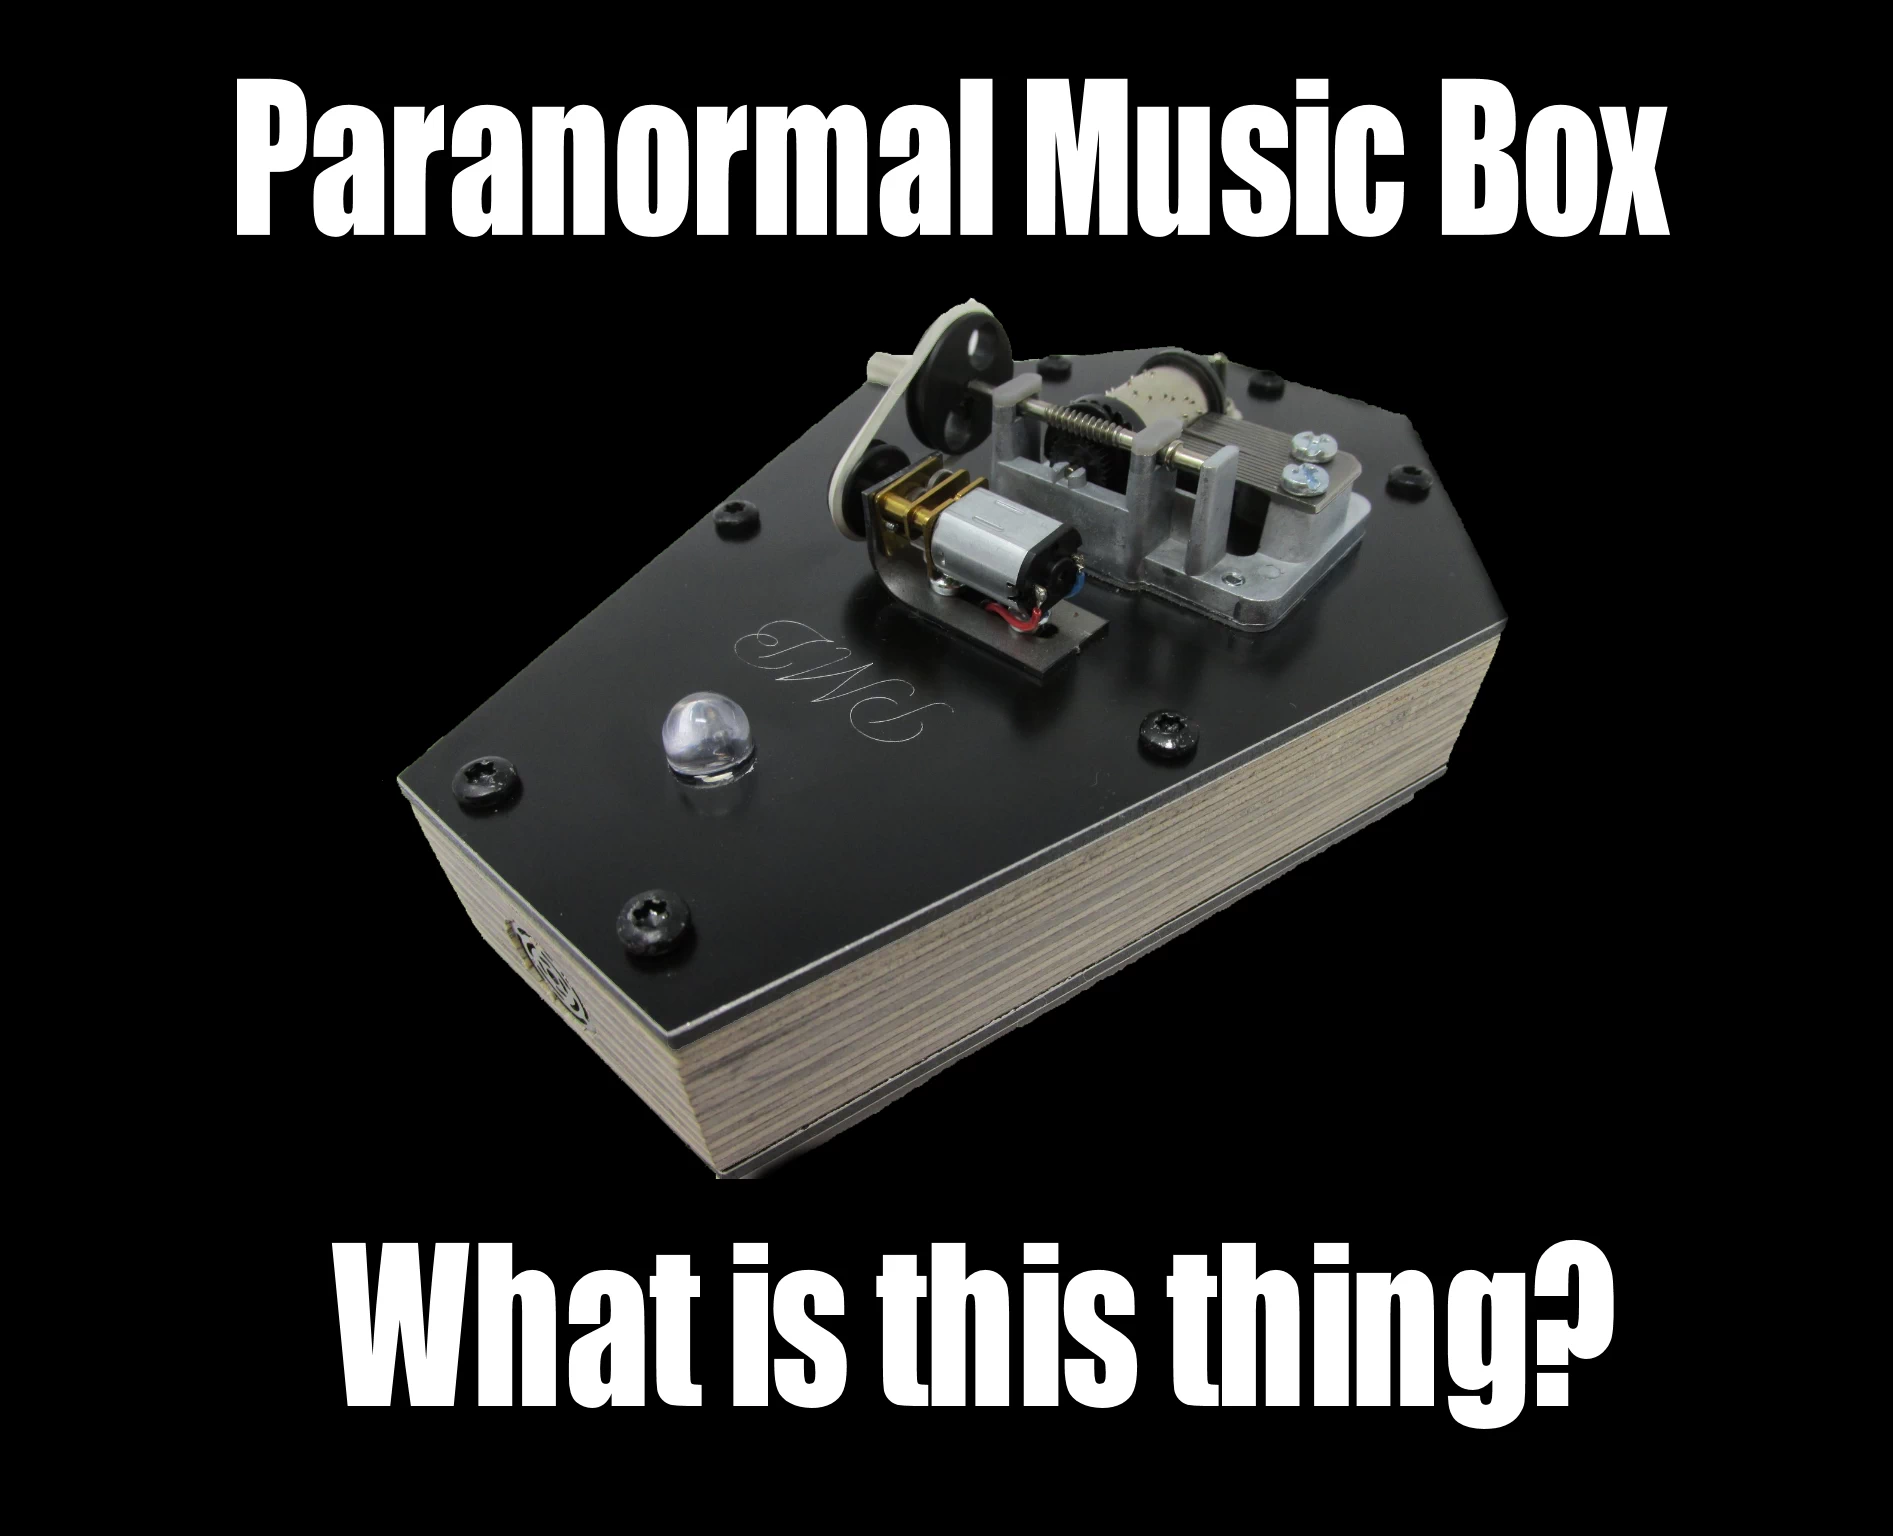 Paranormal Music Box Do they Work? Are Fake or Real? Let's find out